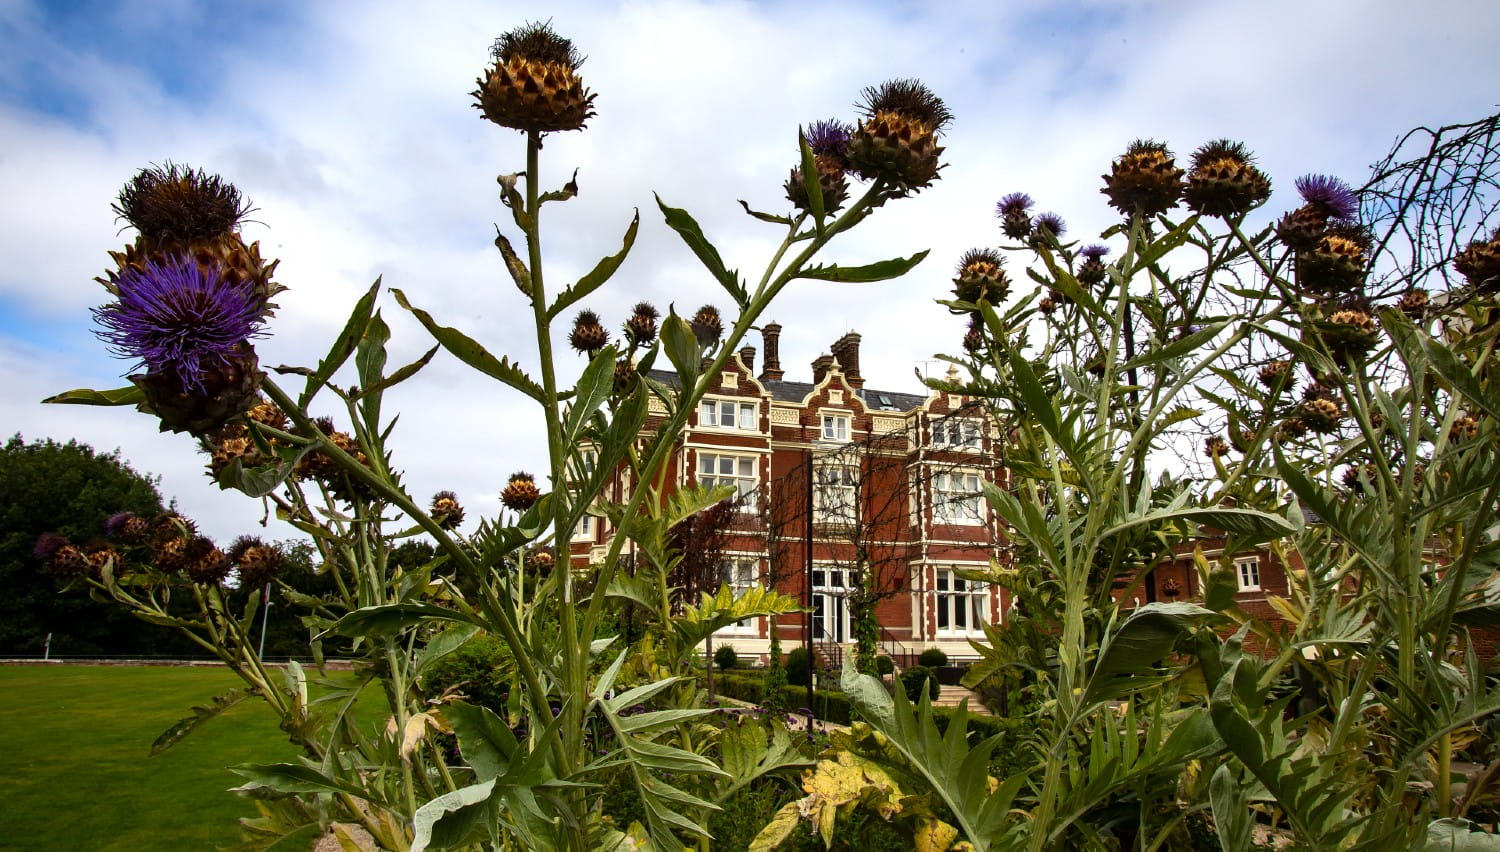 Thistles at Wivenhoe House